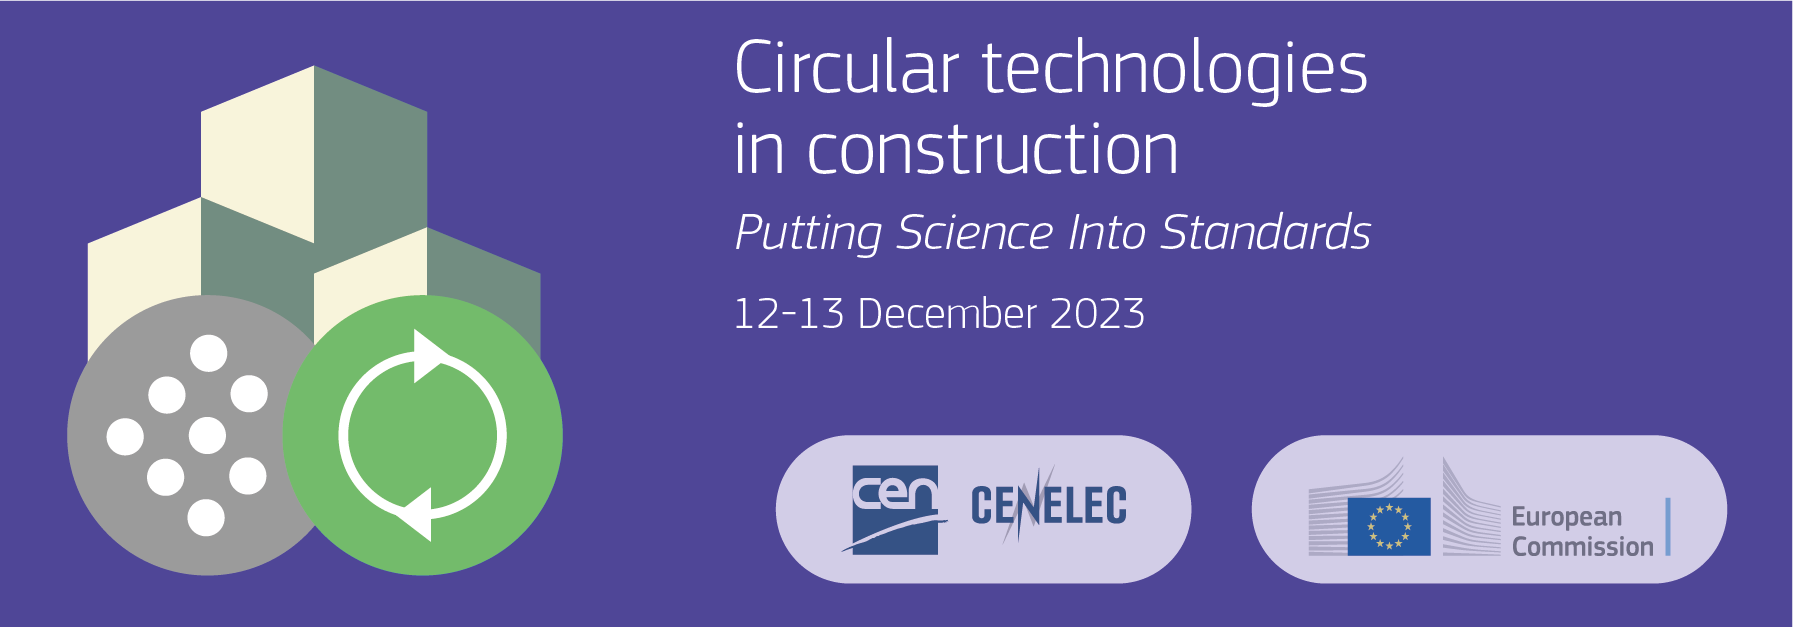 Putting Science into Standards (PSIS) workshop – Circular Technologies for construction industry